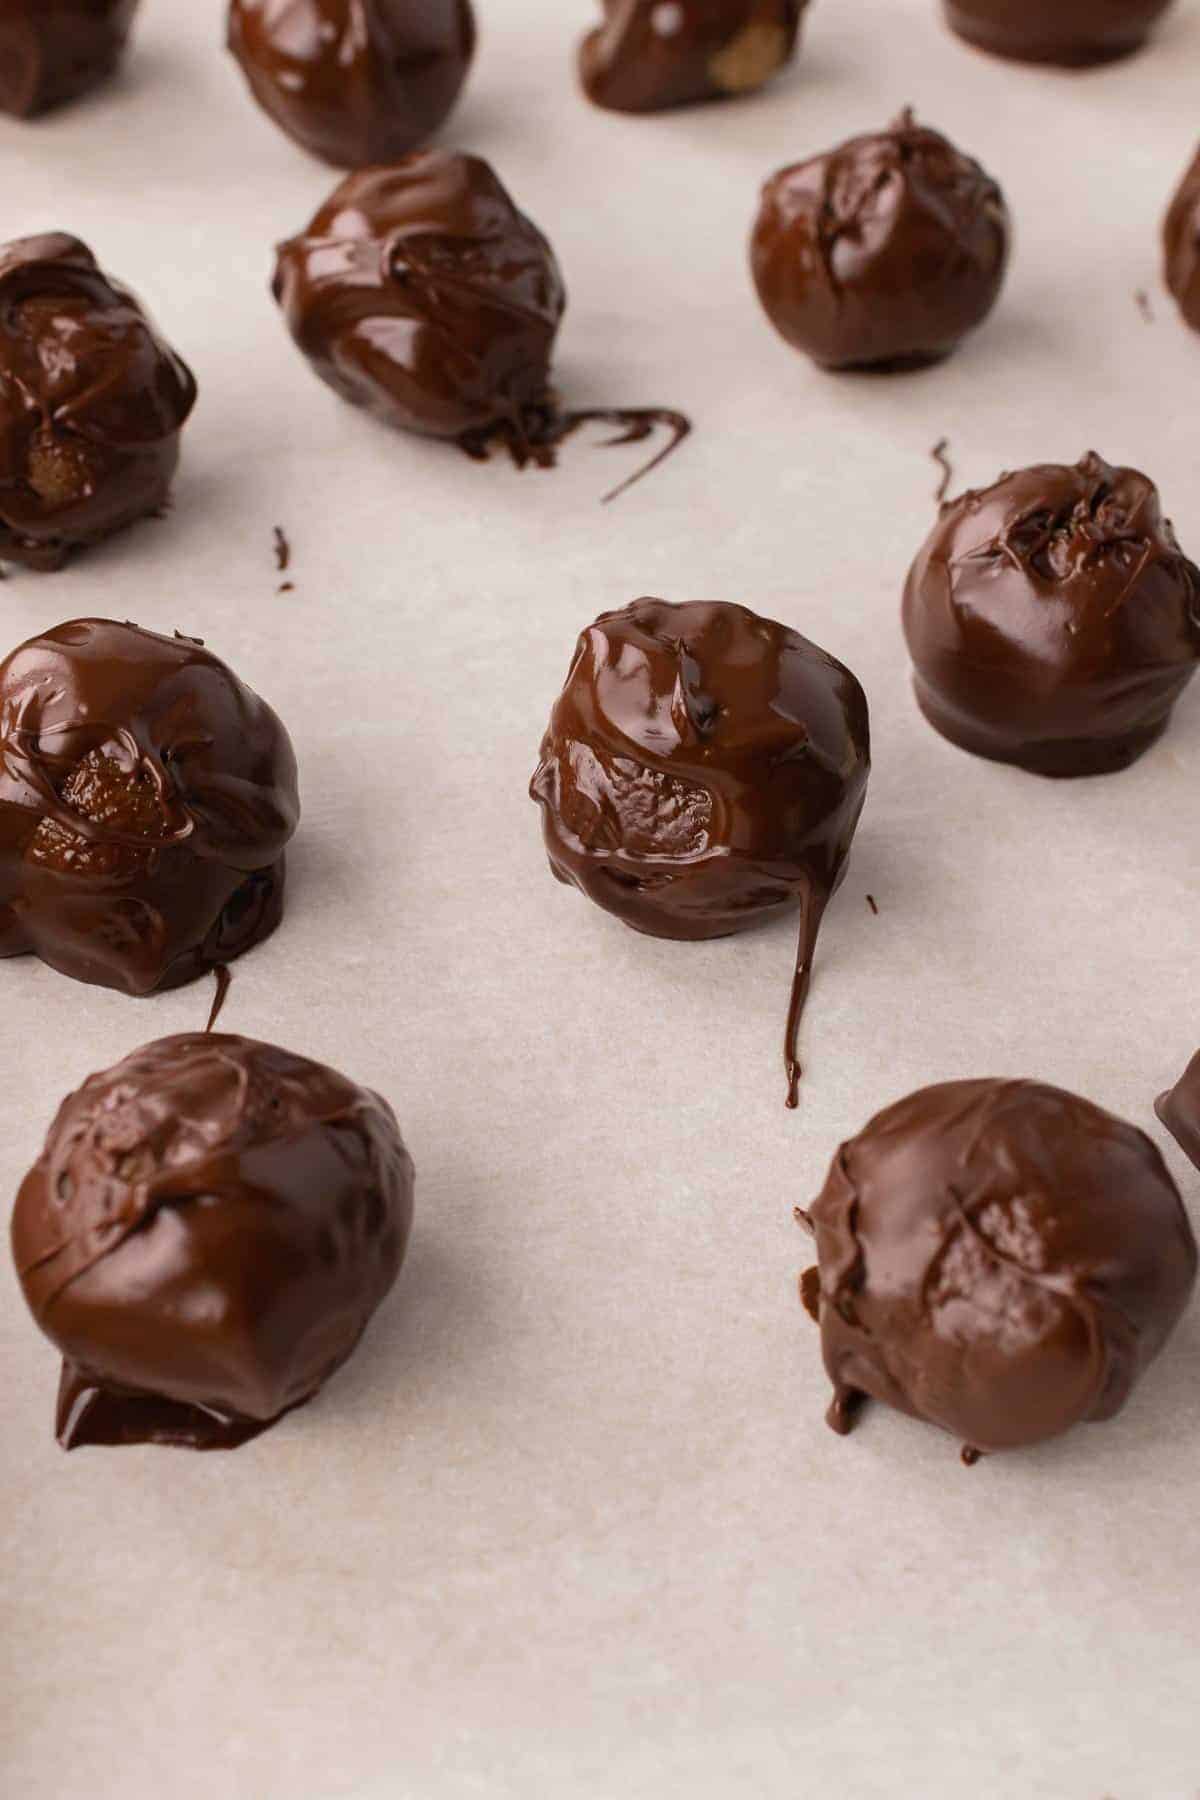 Chocolate covered almond truffles on a cooking sheet